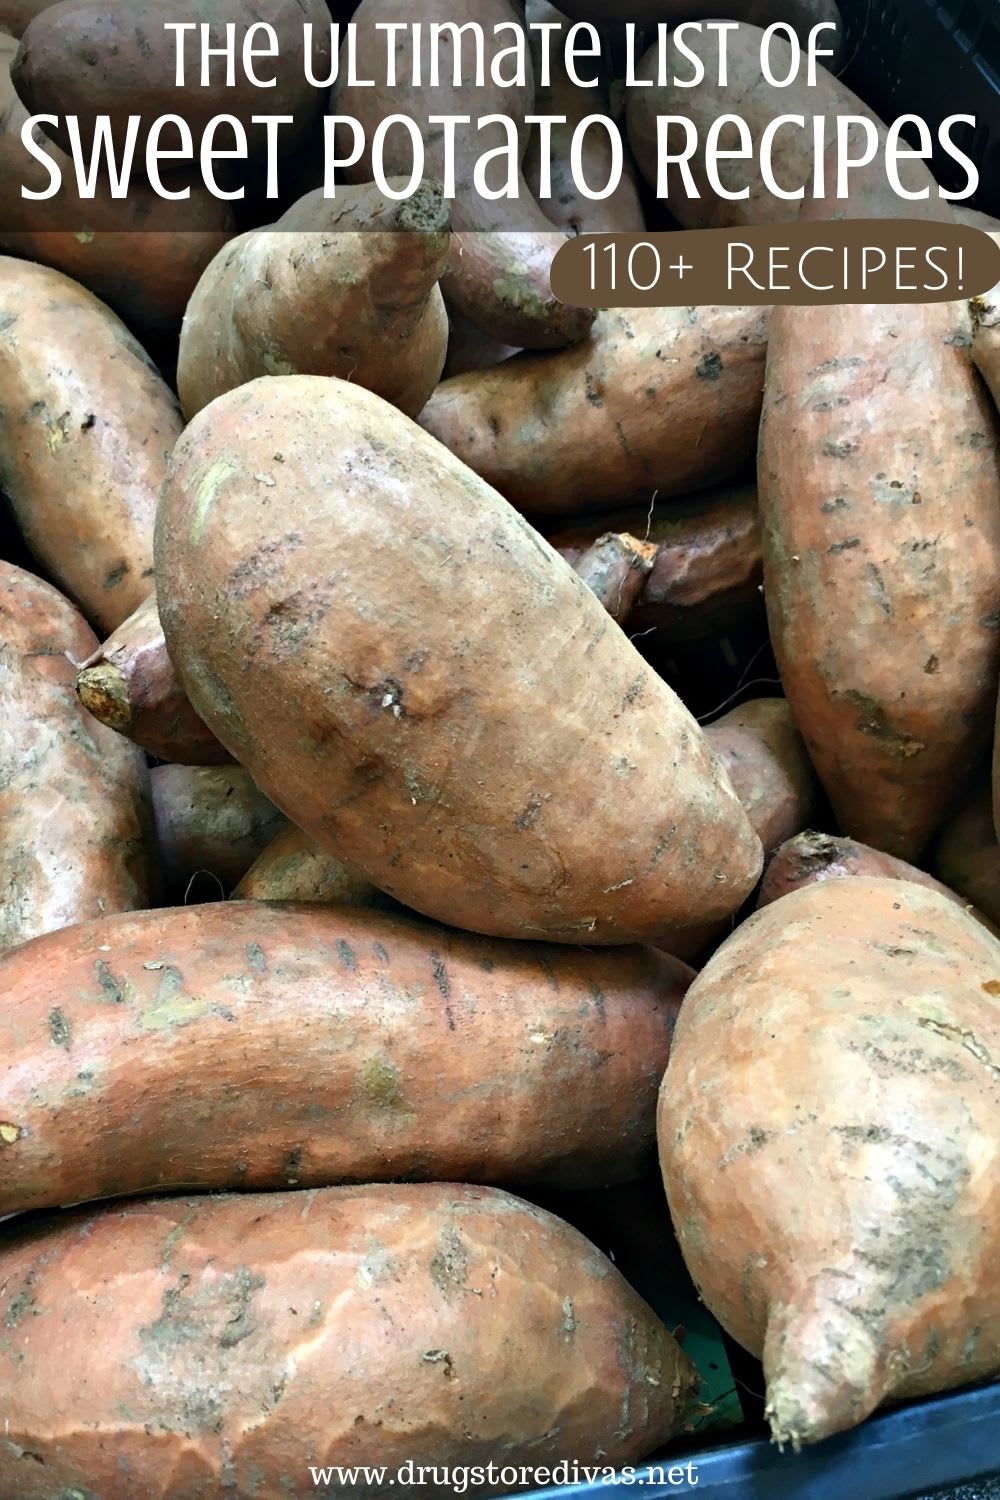 The Ultimate List Of Sweet Potato Recipes